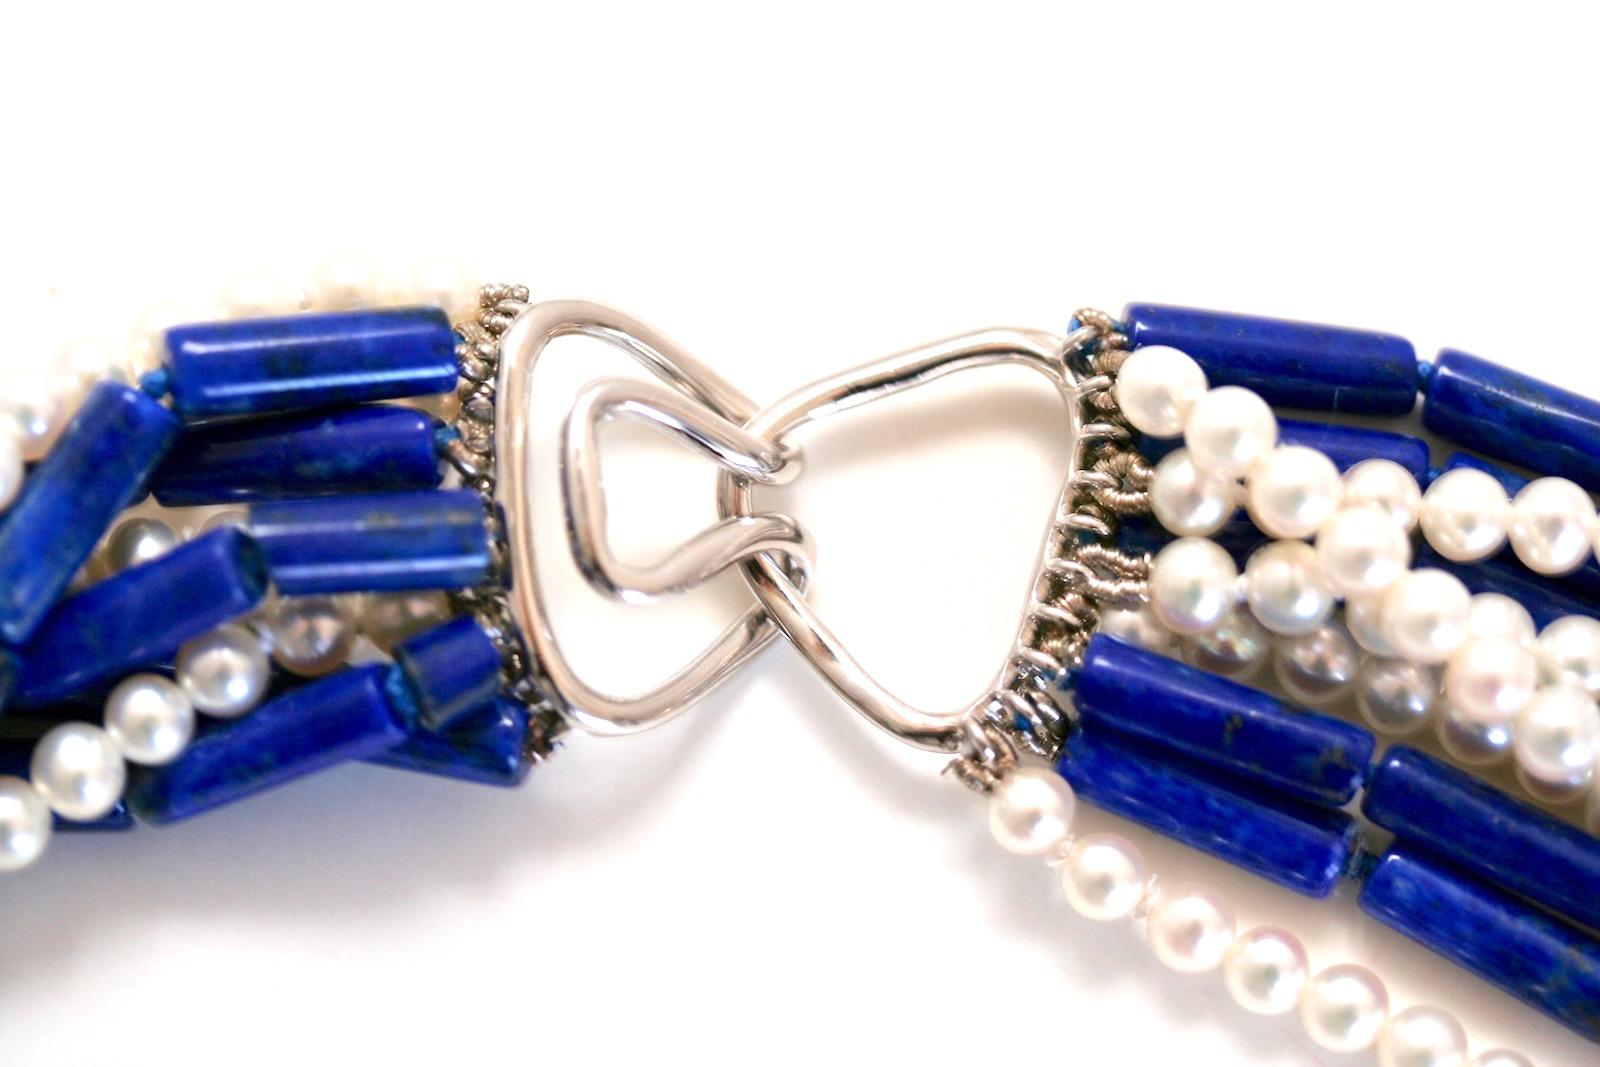 Fabulous lapis lazuli and pearl toursade necklace consisting of 10 strands joined together with an 18k white gold heavy handmade hook and eye clasp for ease in wearing.  

This hand-knotted beauty is stjurdily made to provide you with many years of